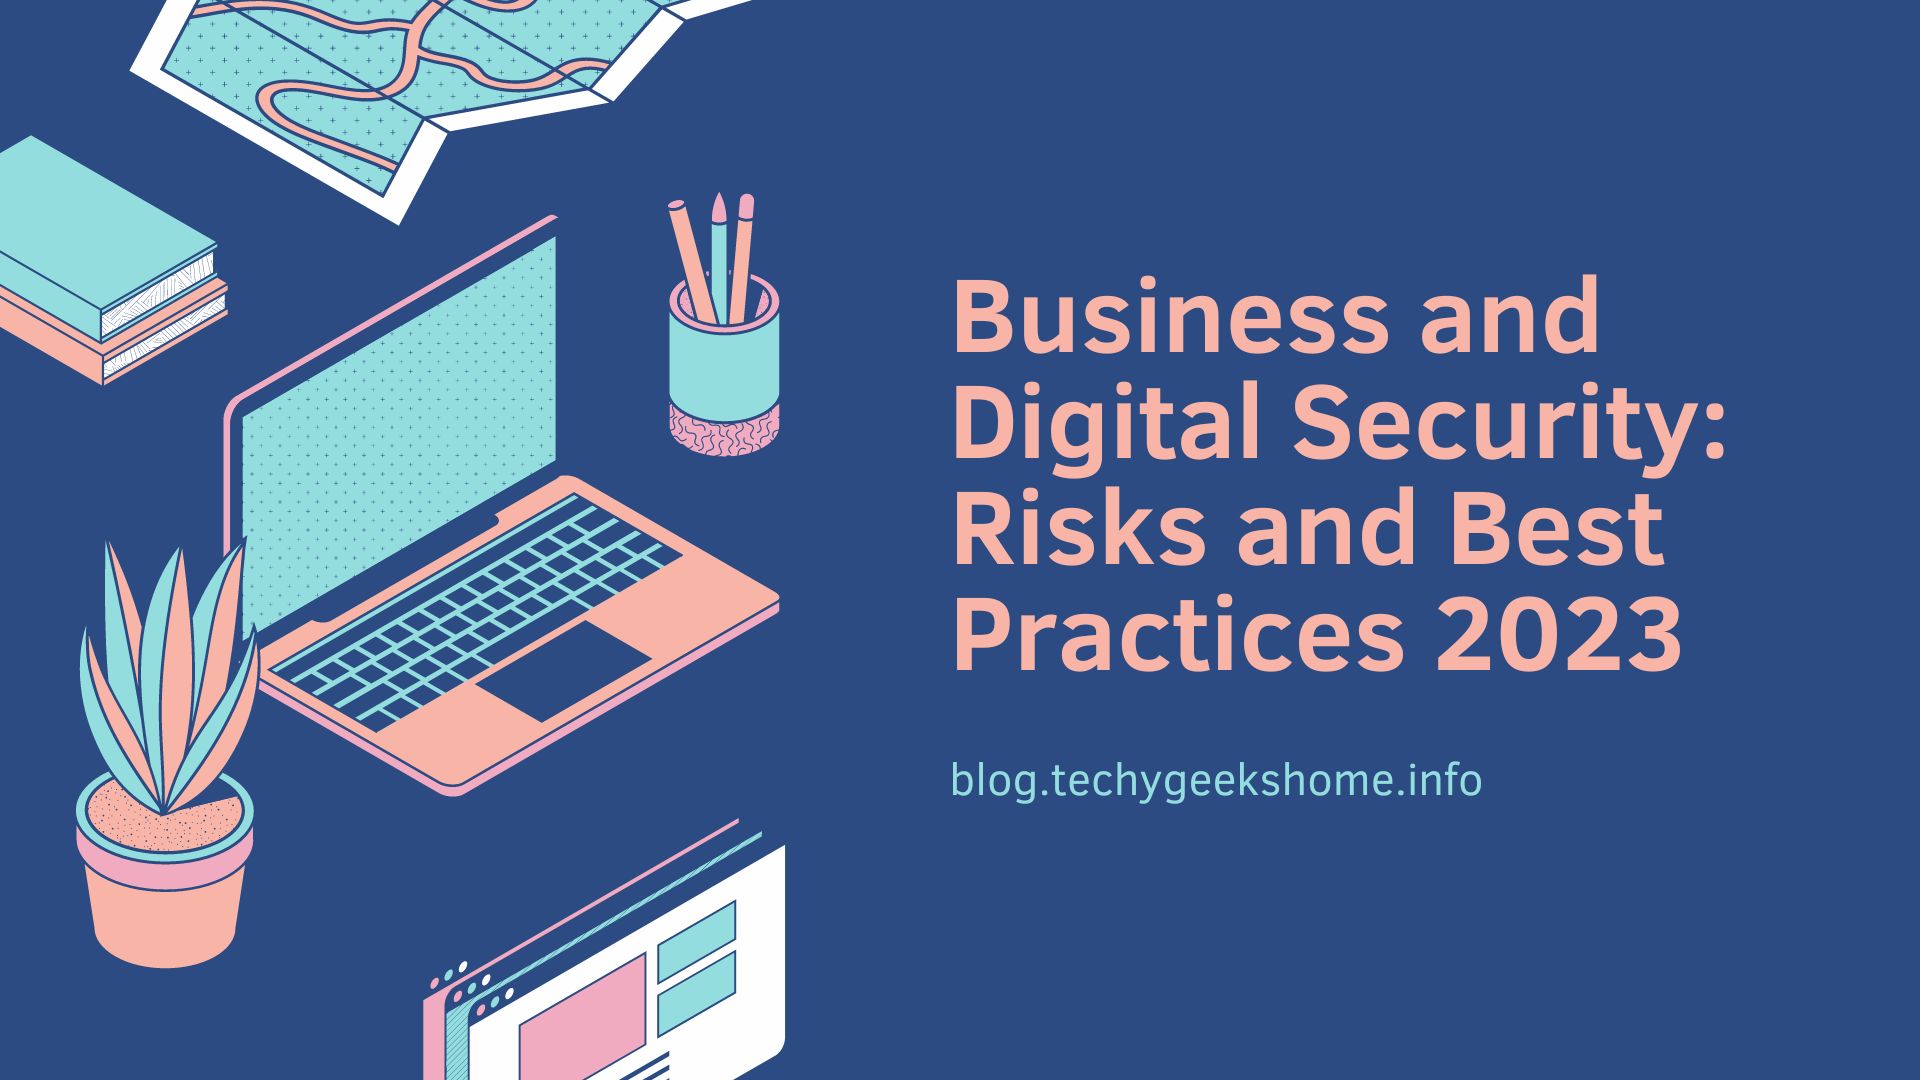 Business and Digital Security: Risks and Best Practices 2023